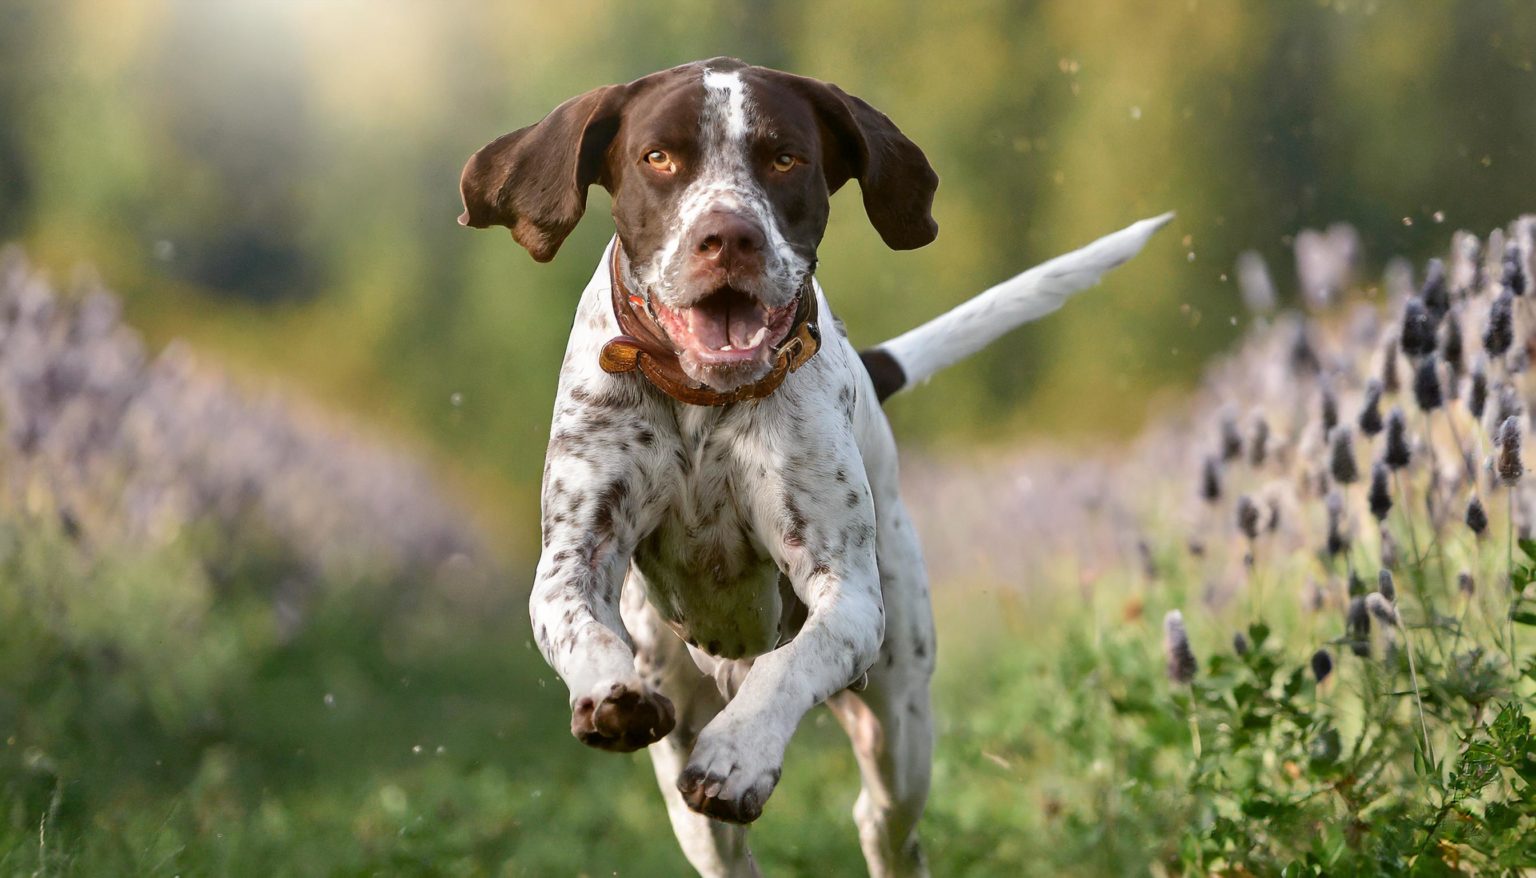 The Braque Français is a type of French pointer that has existed since the 15th century. Over time, people brought or imported these hunting dogs to other countries and crossed them with other breeds. And by the end of the 19th century, there were two distinct types: the Gascony and the Pyrenean.